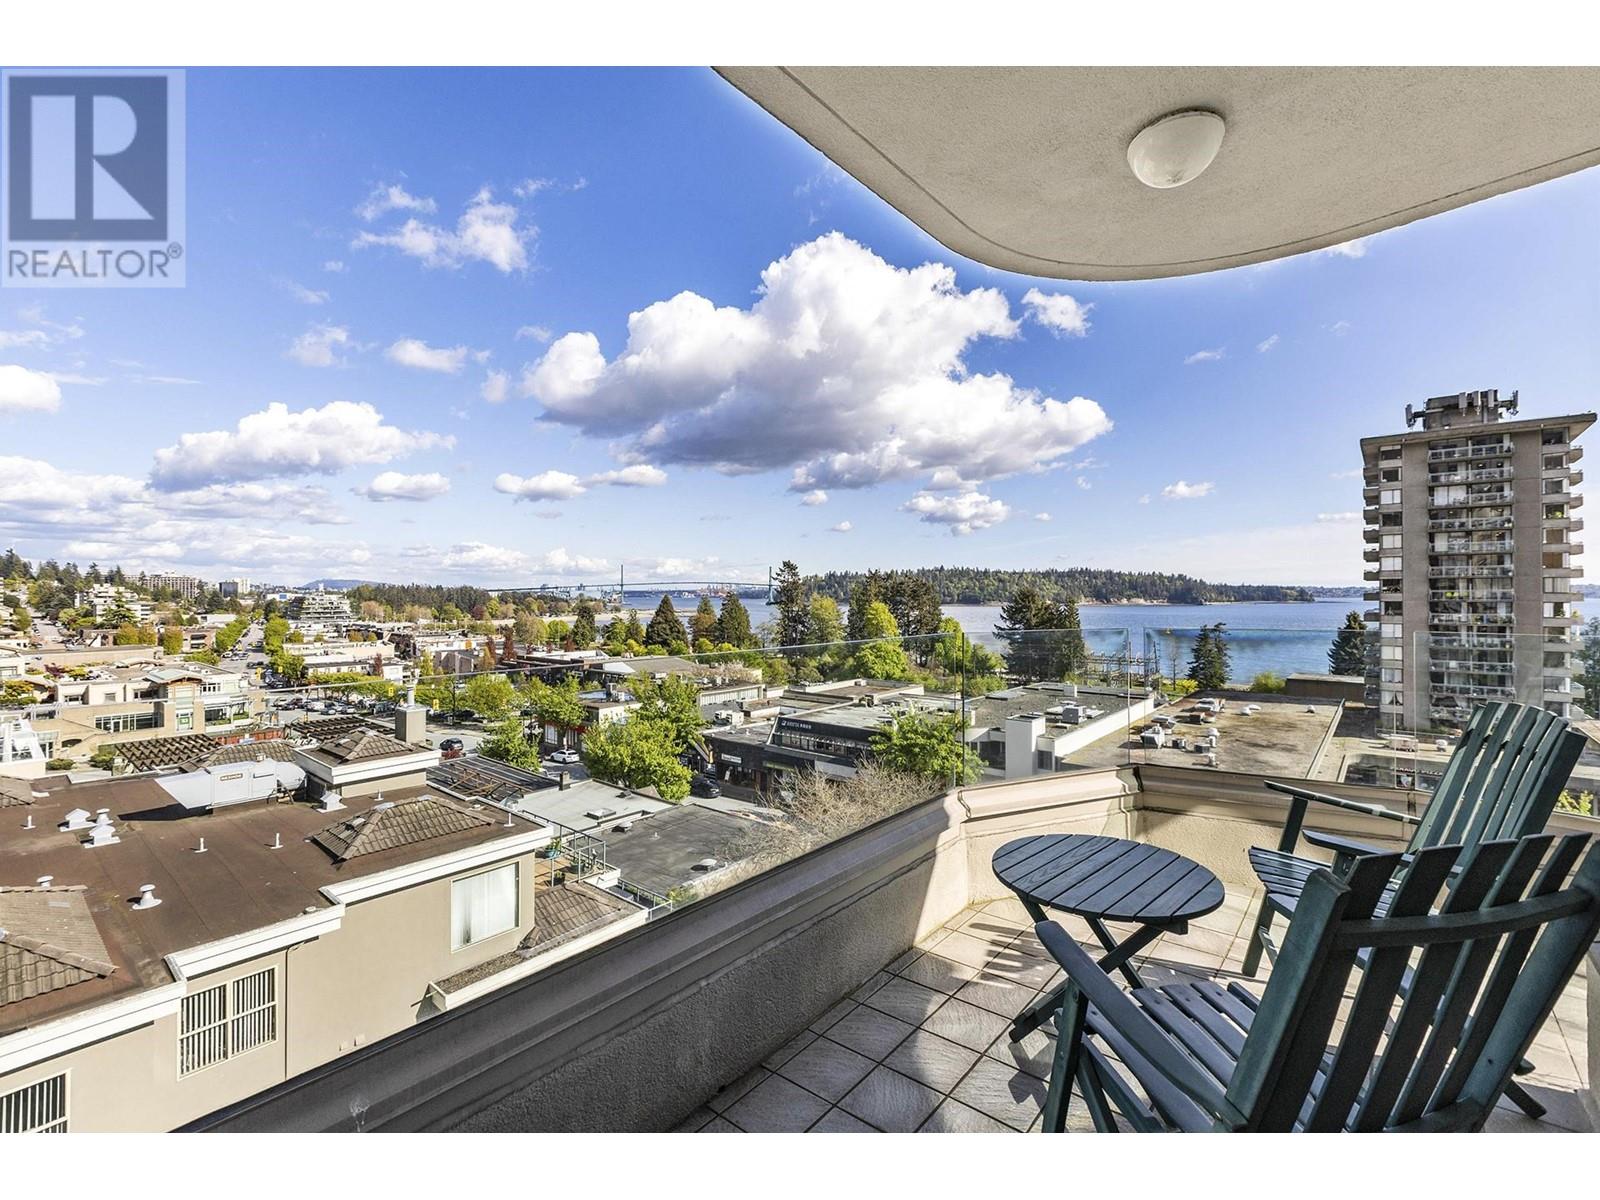 602 570 18TH STREET, west vancouver, British Columbia